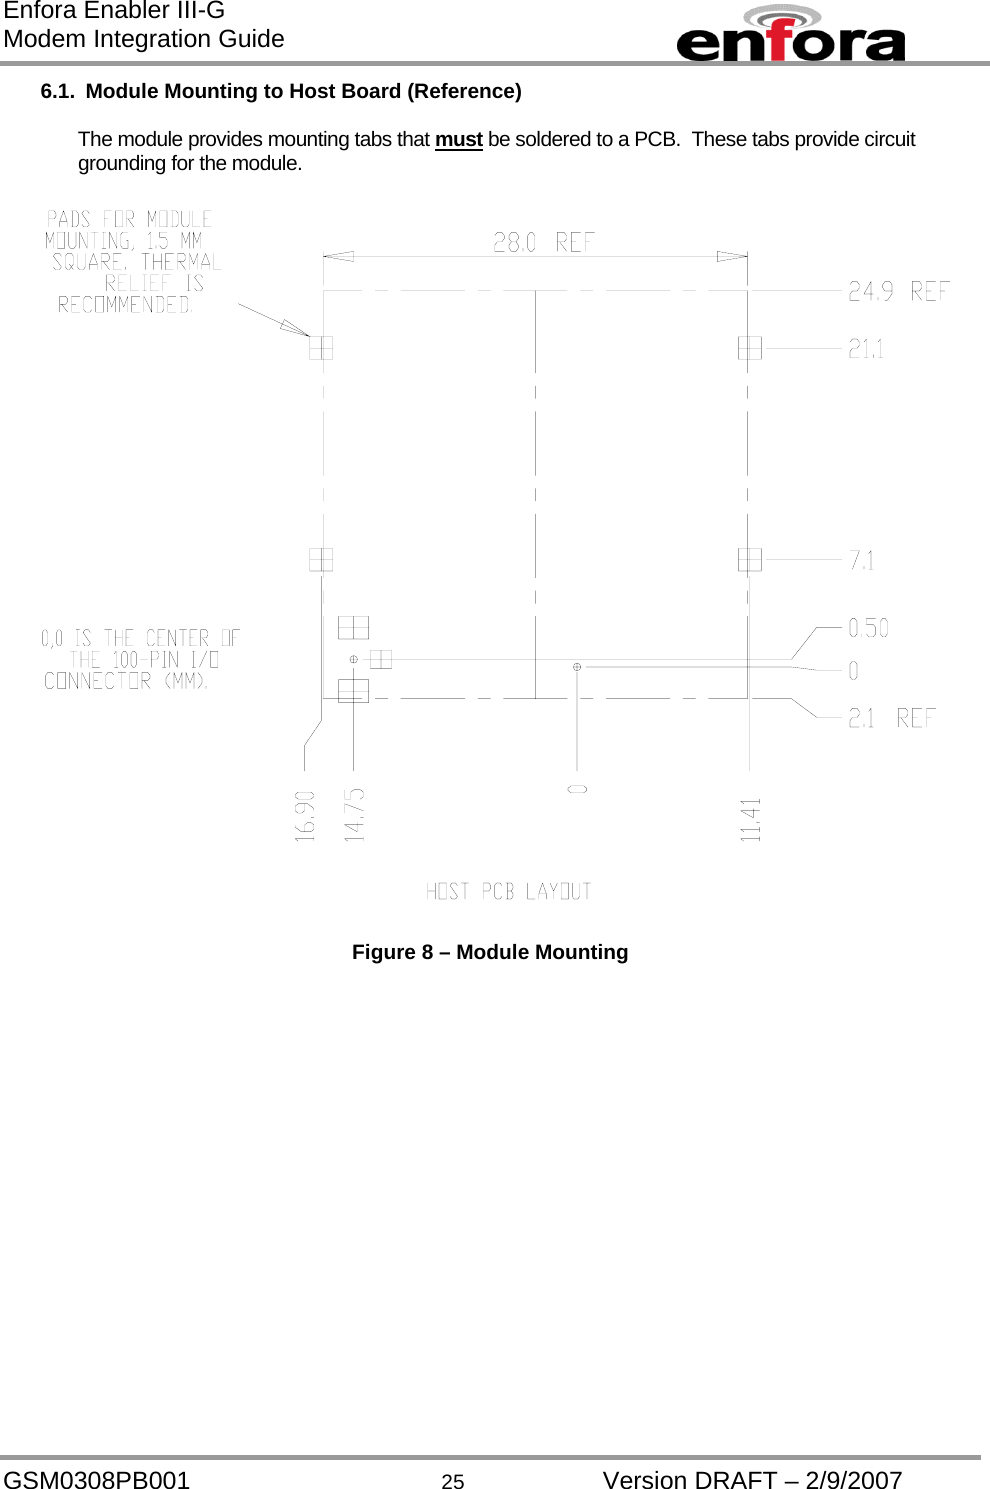 Enfora Enabler III-G Modem Integration Guide 6.1.  Module Mounting to Host Board (Reference)  The module provides mounting tabs that must be soldered to a PCB.  These tabs provide circuit grounding for the module.  Figure 8 – Module Mounting  GSM0308PB001  25  Version DRAFT – 2/9/2007 